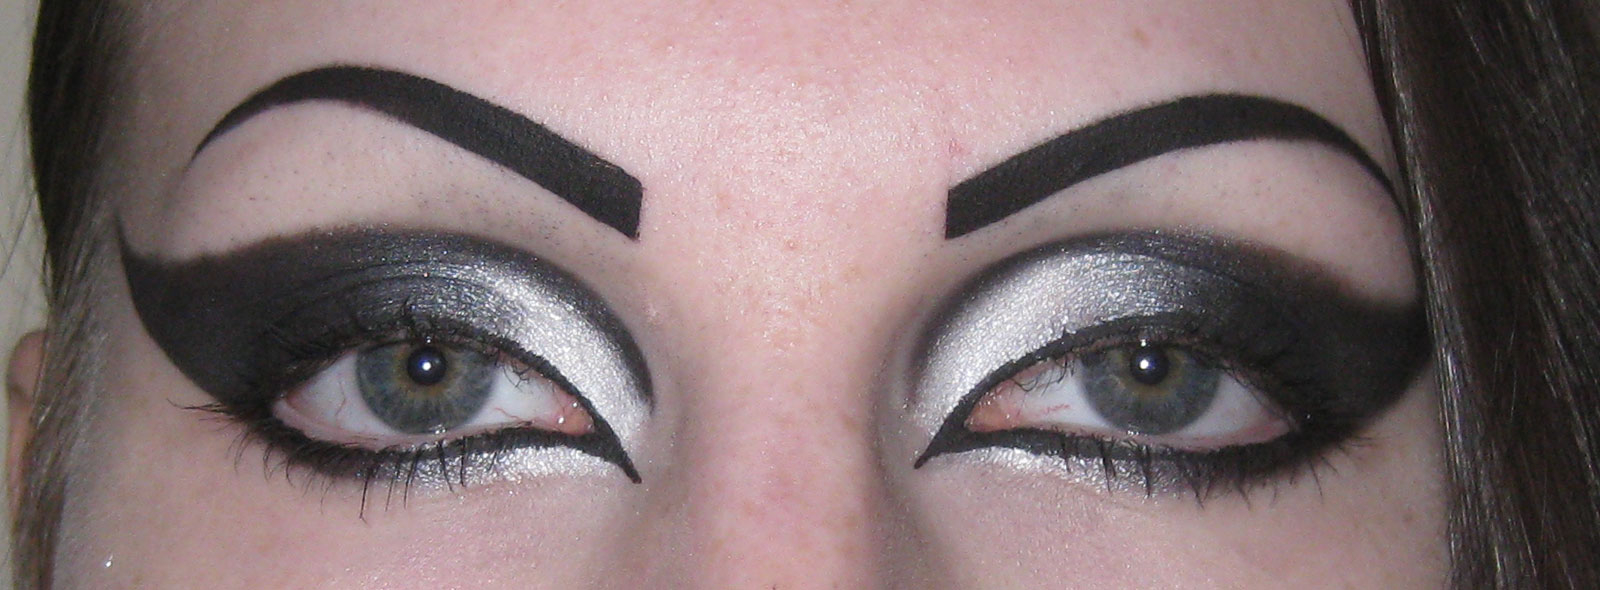 Black And White Eye Makeup Dramatic Gothic White To Black Extended Winged Cat Eye Makeup